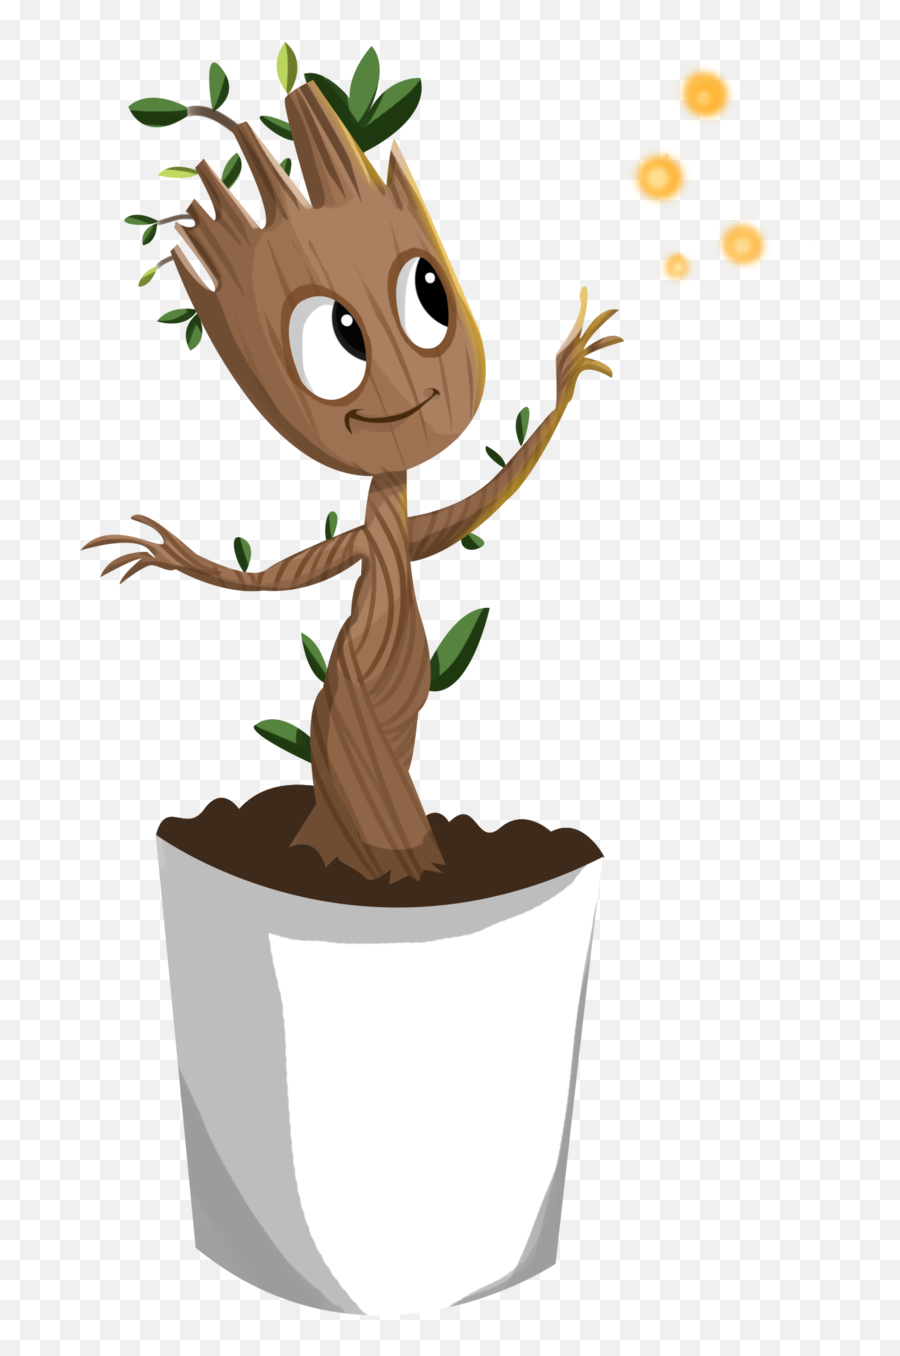 Baby Groot Clipart Hq Png Image - Baby Groot Cartoon Transparent Background Emoji,Groot Clipart